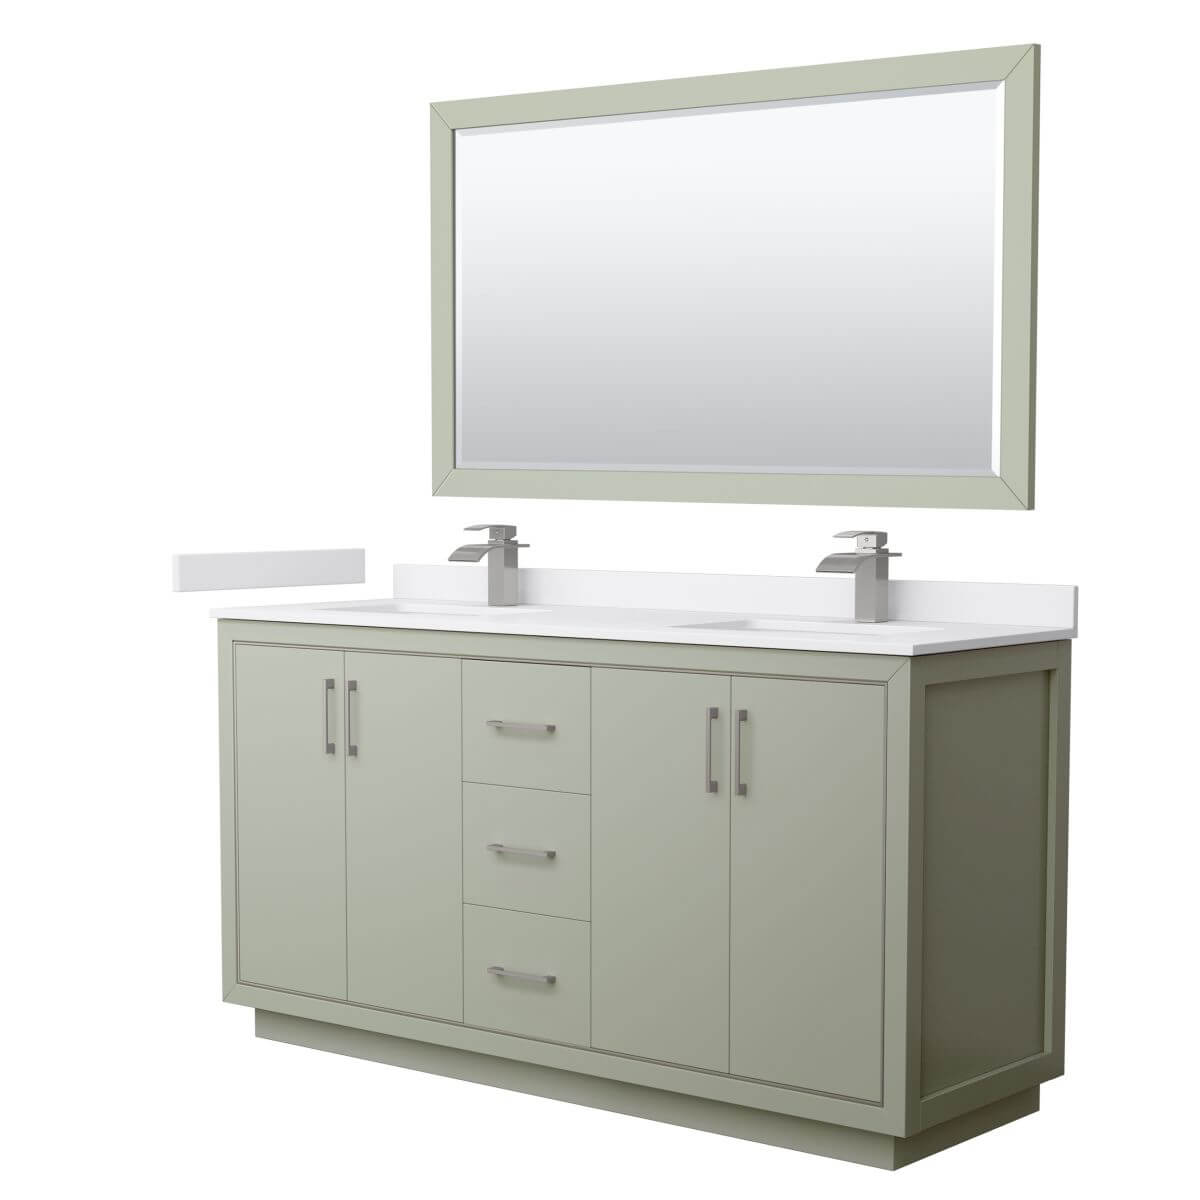 Wyndham Collection WCF111166DLGWCUNSM58 Icon 66 inch Double Bathroom Vanity in Light Green with White Cultured Marble Countertop, Undermount Square Sinks, Brushed Nickel Trim and 58 Inch Mirror